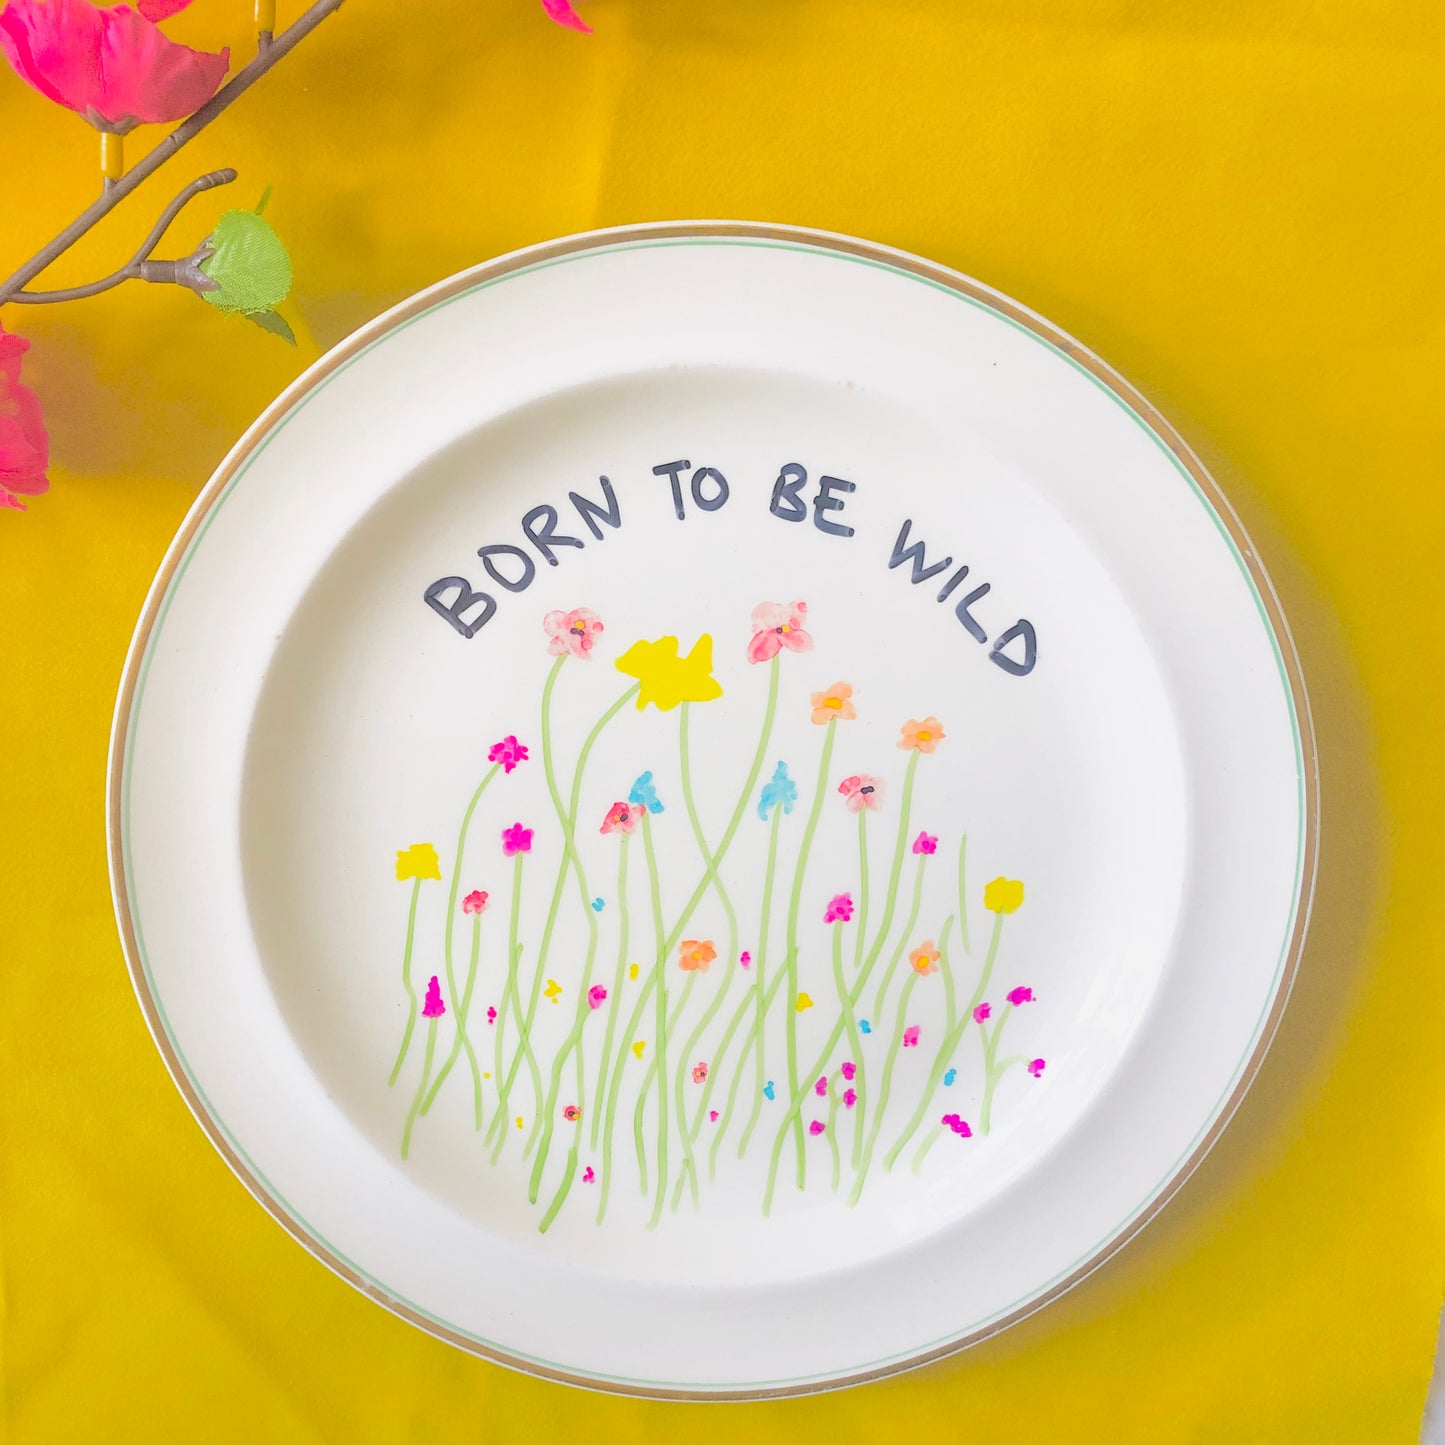 Upcycled “Born to be Wild” by Wedgwood Plates